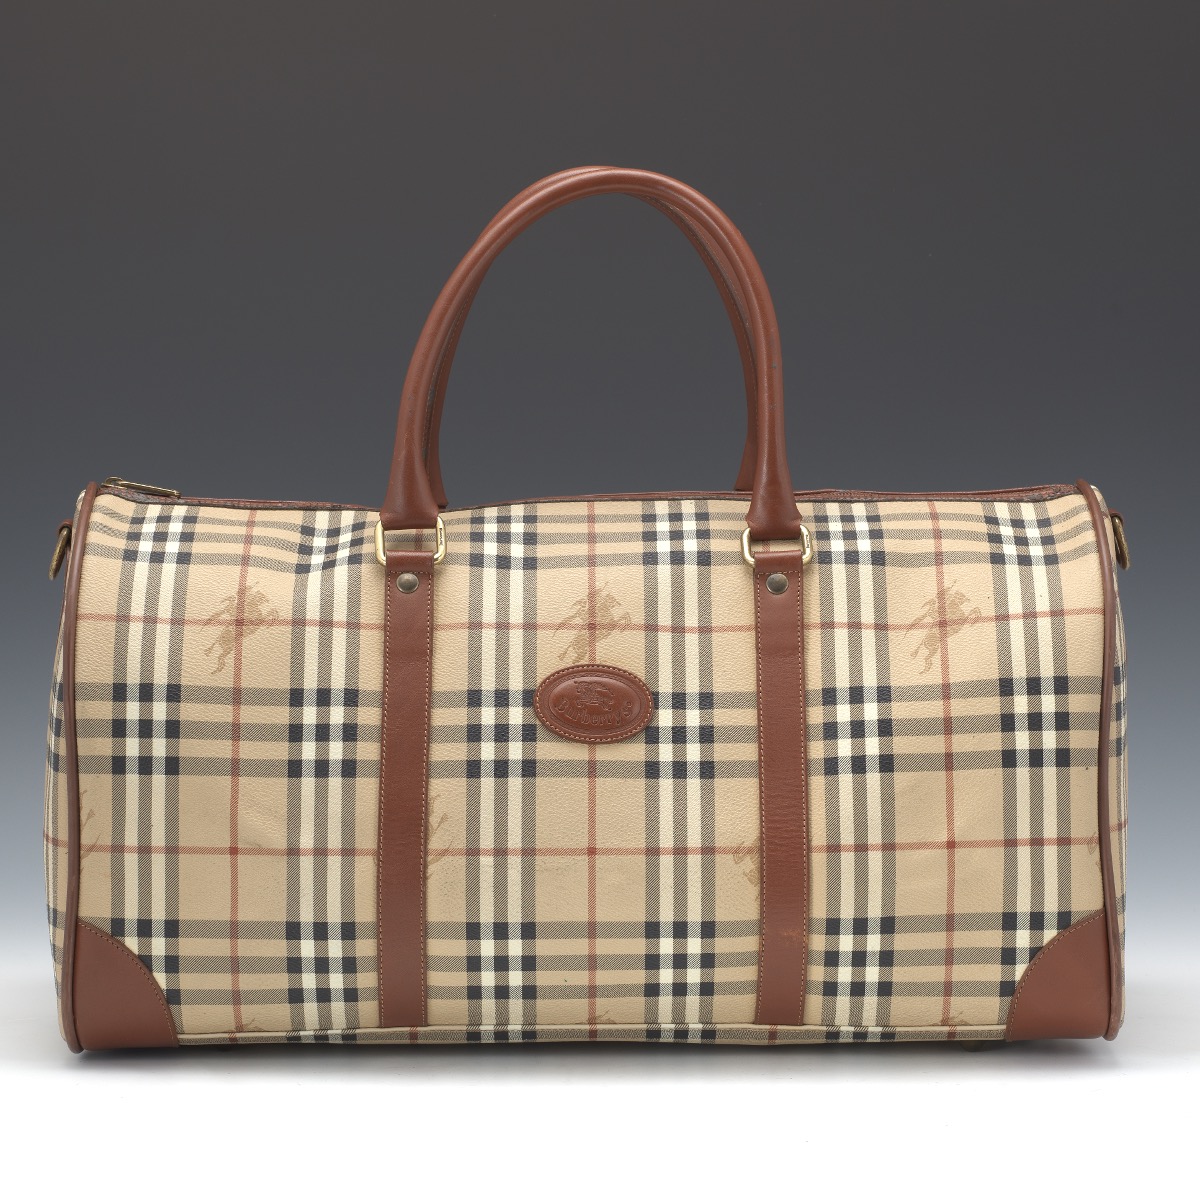 Burberry Coated Canvas Haymarket Check Carry On Travel Bag - Image 2 of 9